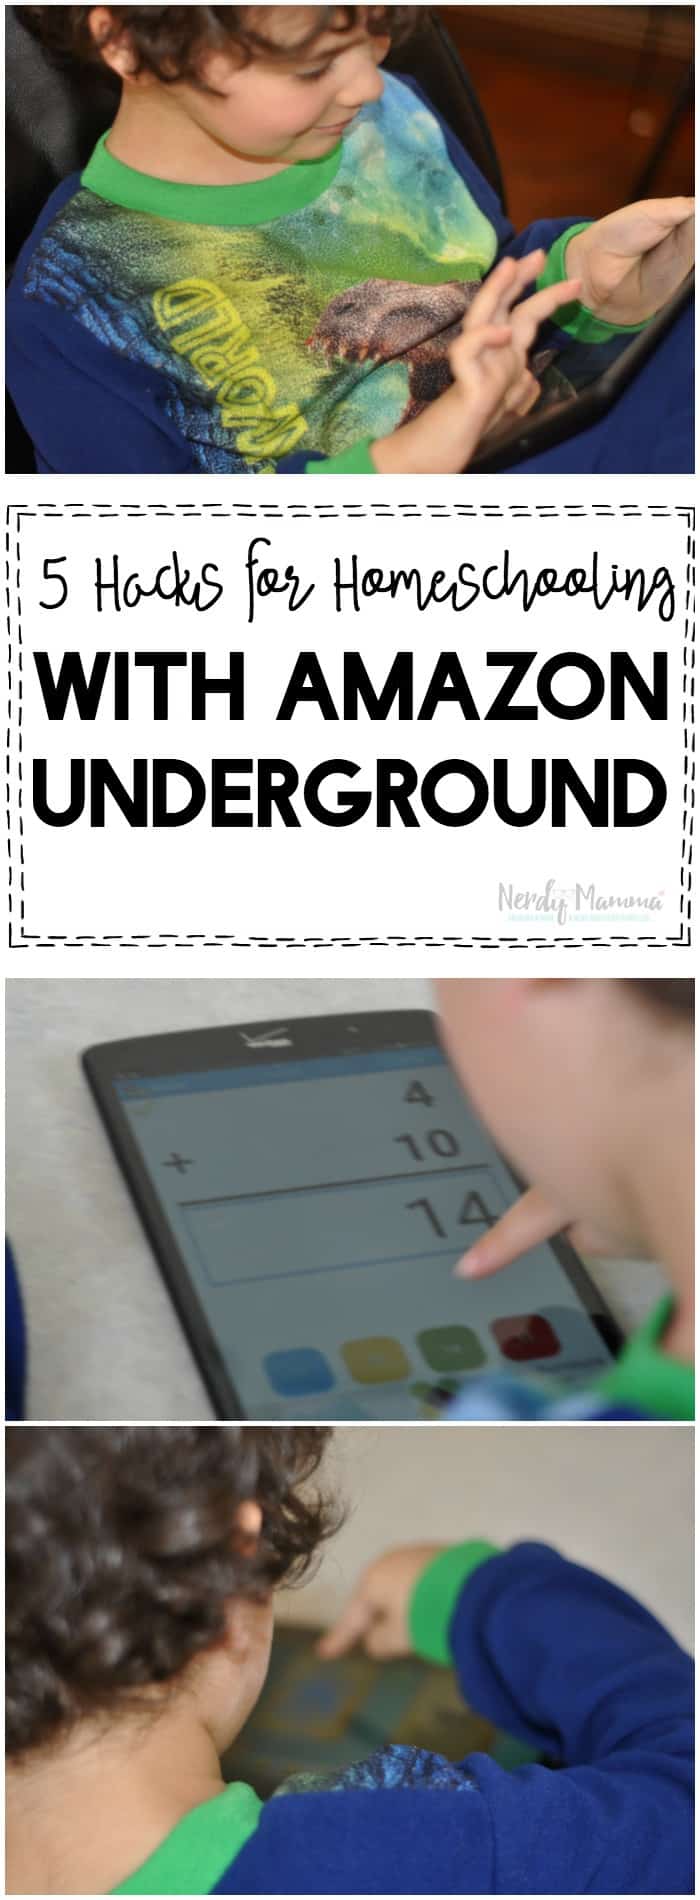 These 5 hacks for homeschooling with Amazon Underground have seriously changed the way that I homeschool! If your kids love technology, you need this!